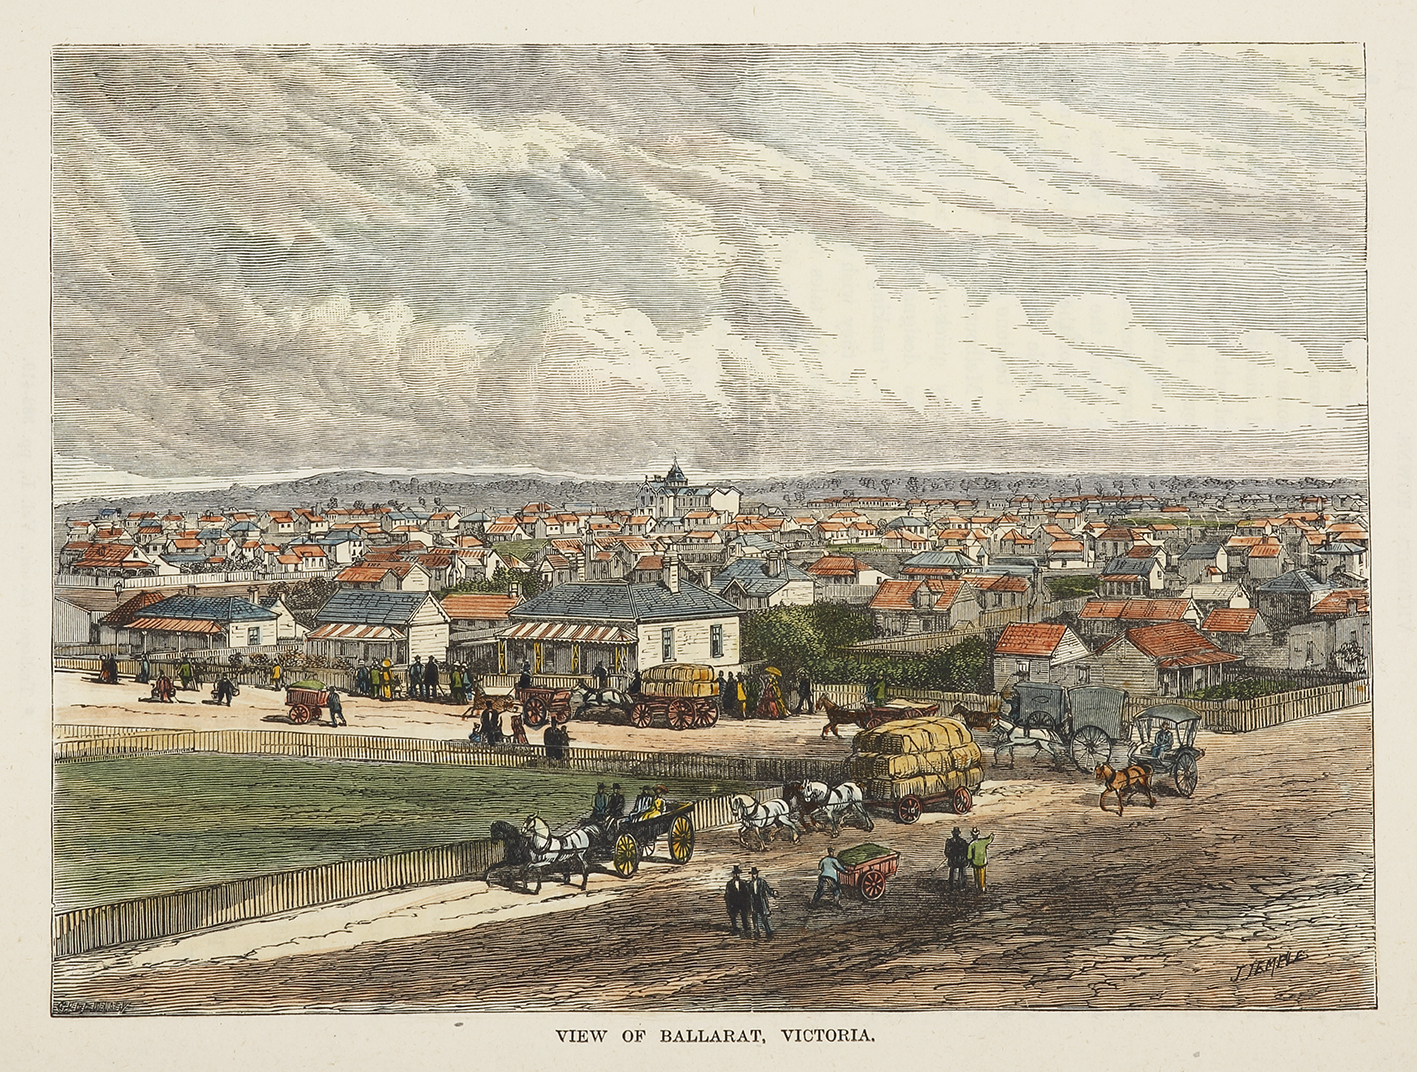 VIC-View of Ballarat, Victoria. - Antique View from 1880